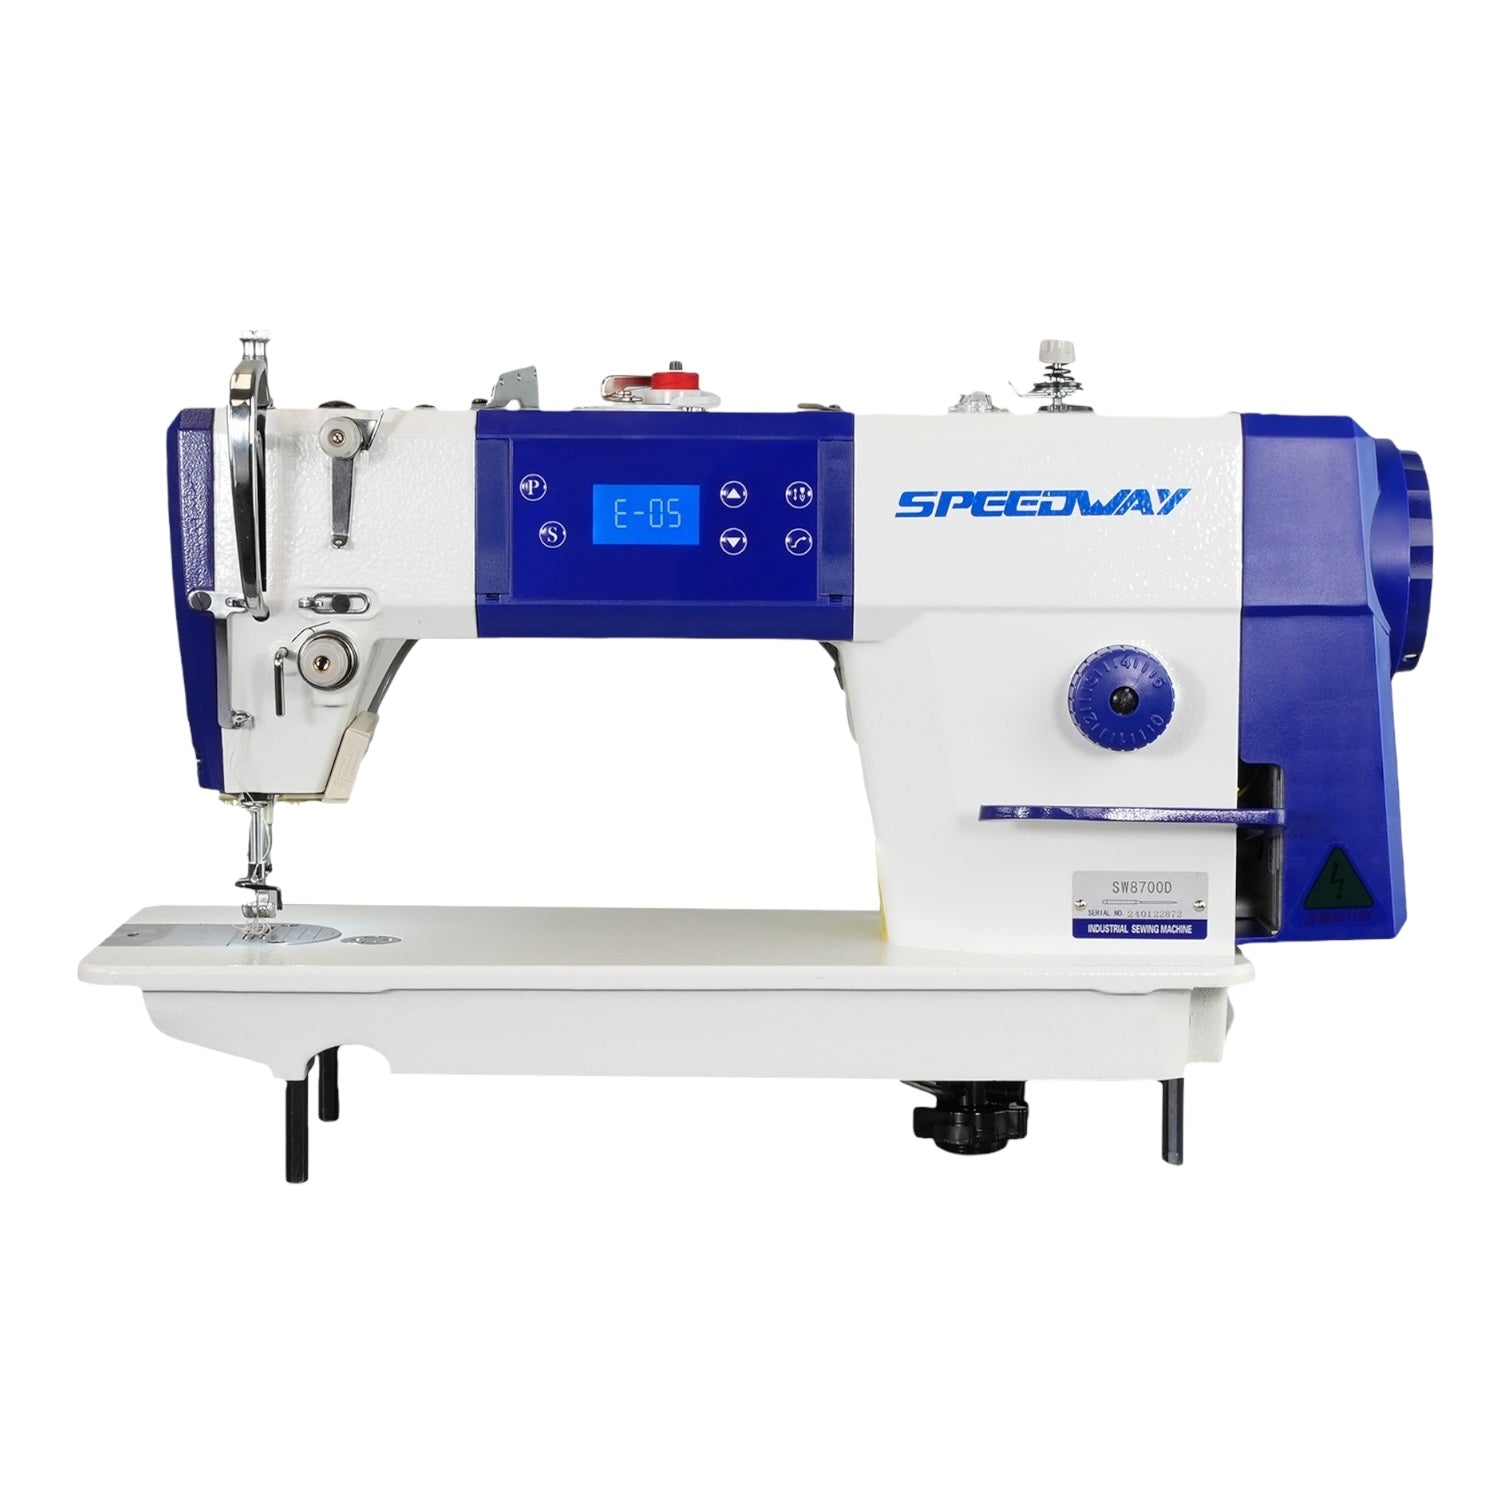 SPEEDWAY SW 8700 D Single Needle Lockstitch Industrial Sewing Machine with Servo Motor, Table and Stand Included